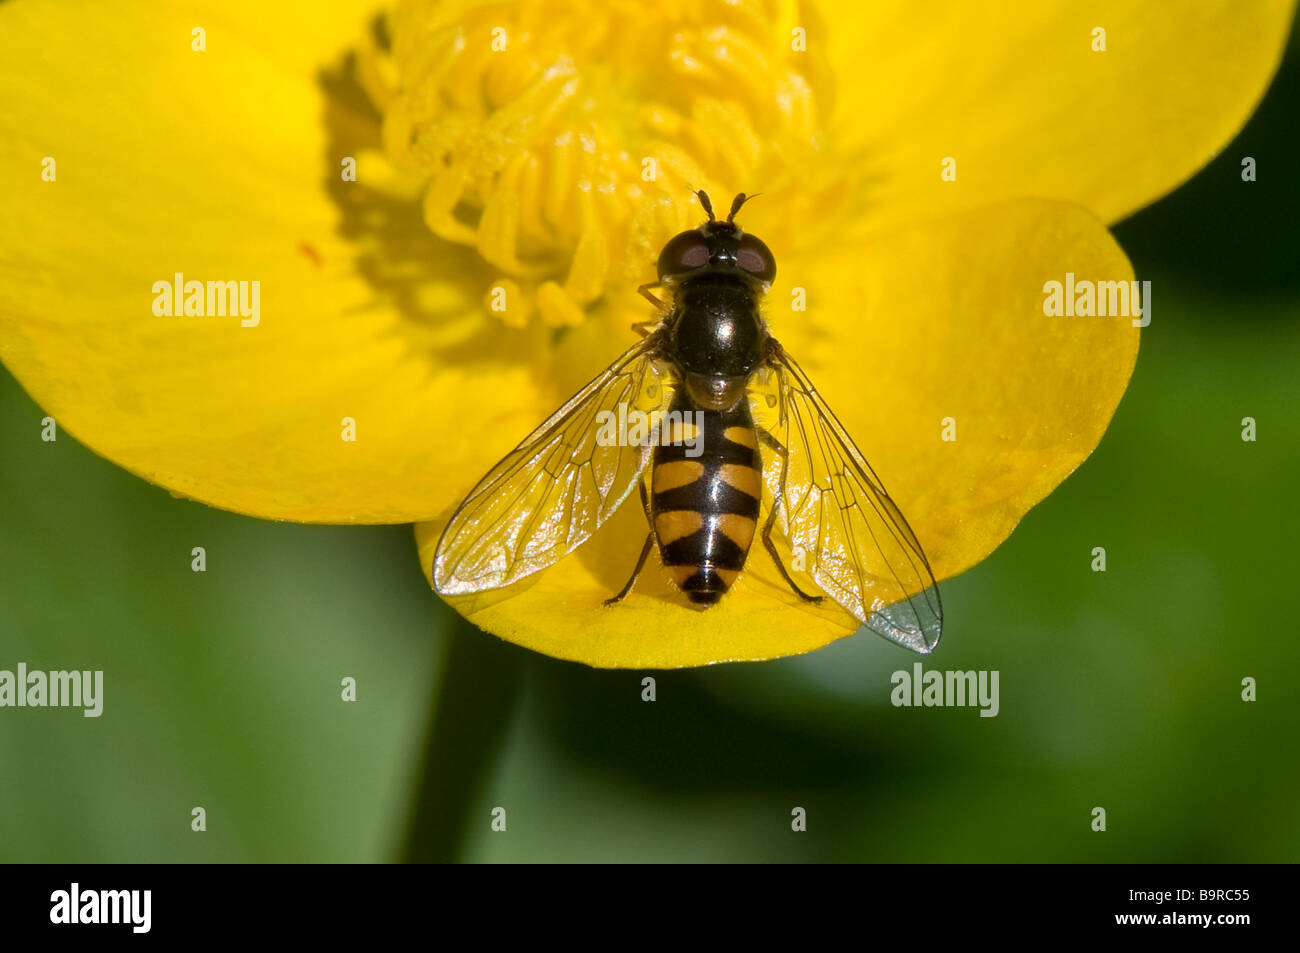 Elangyna viridiceps "hover fly' gros plan sur buttercup Banque D'Images